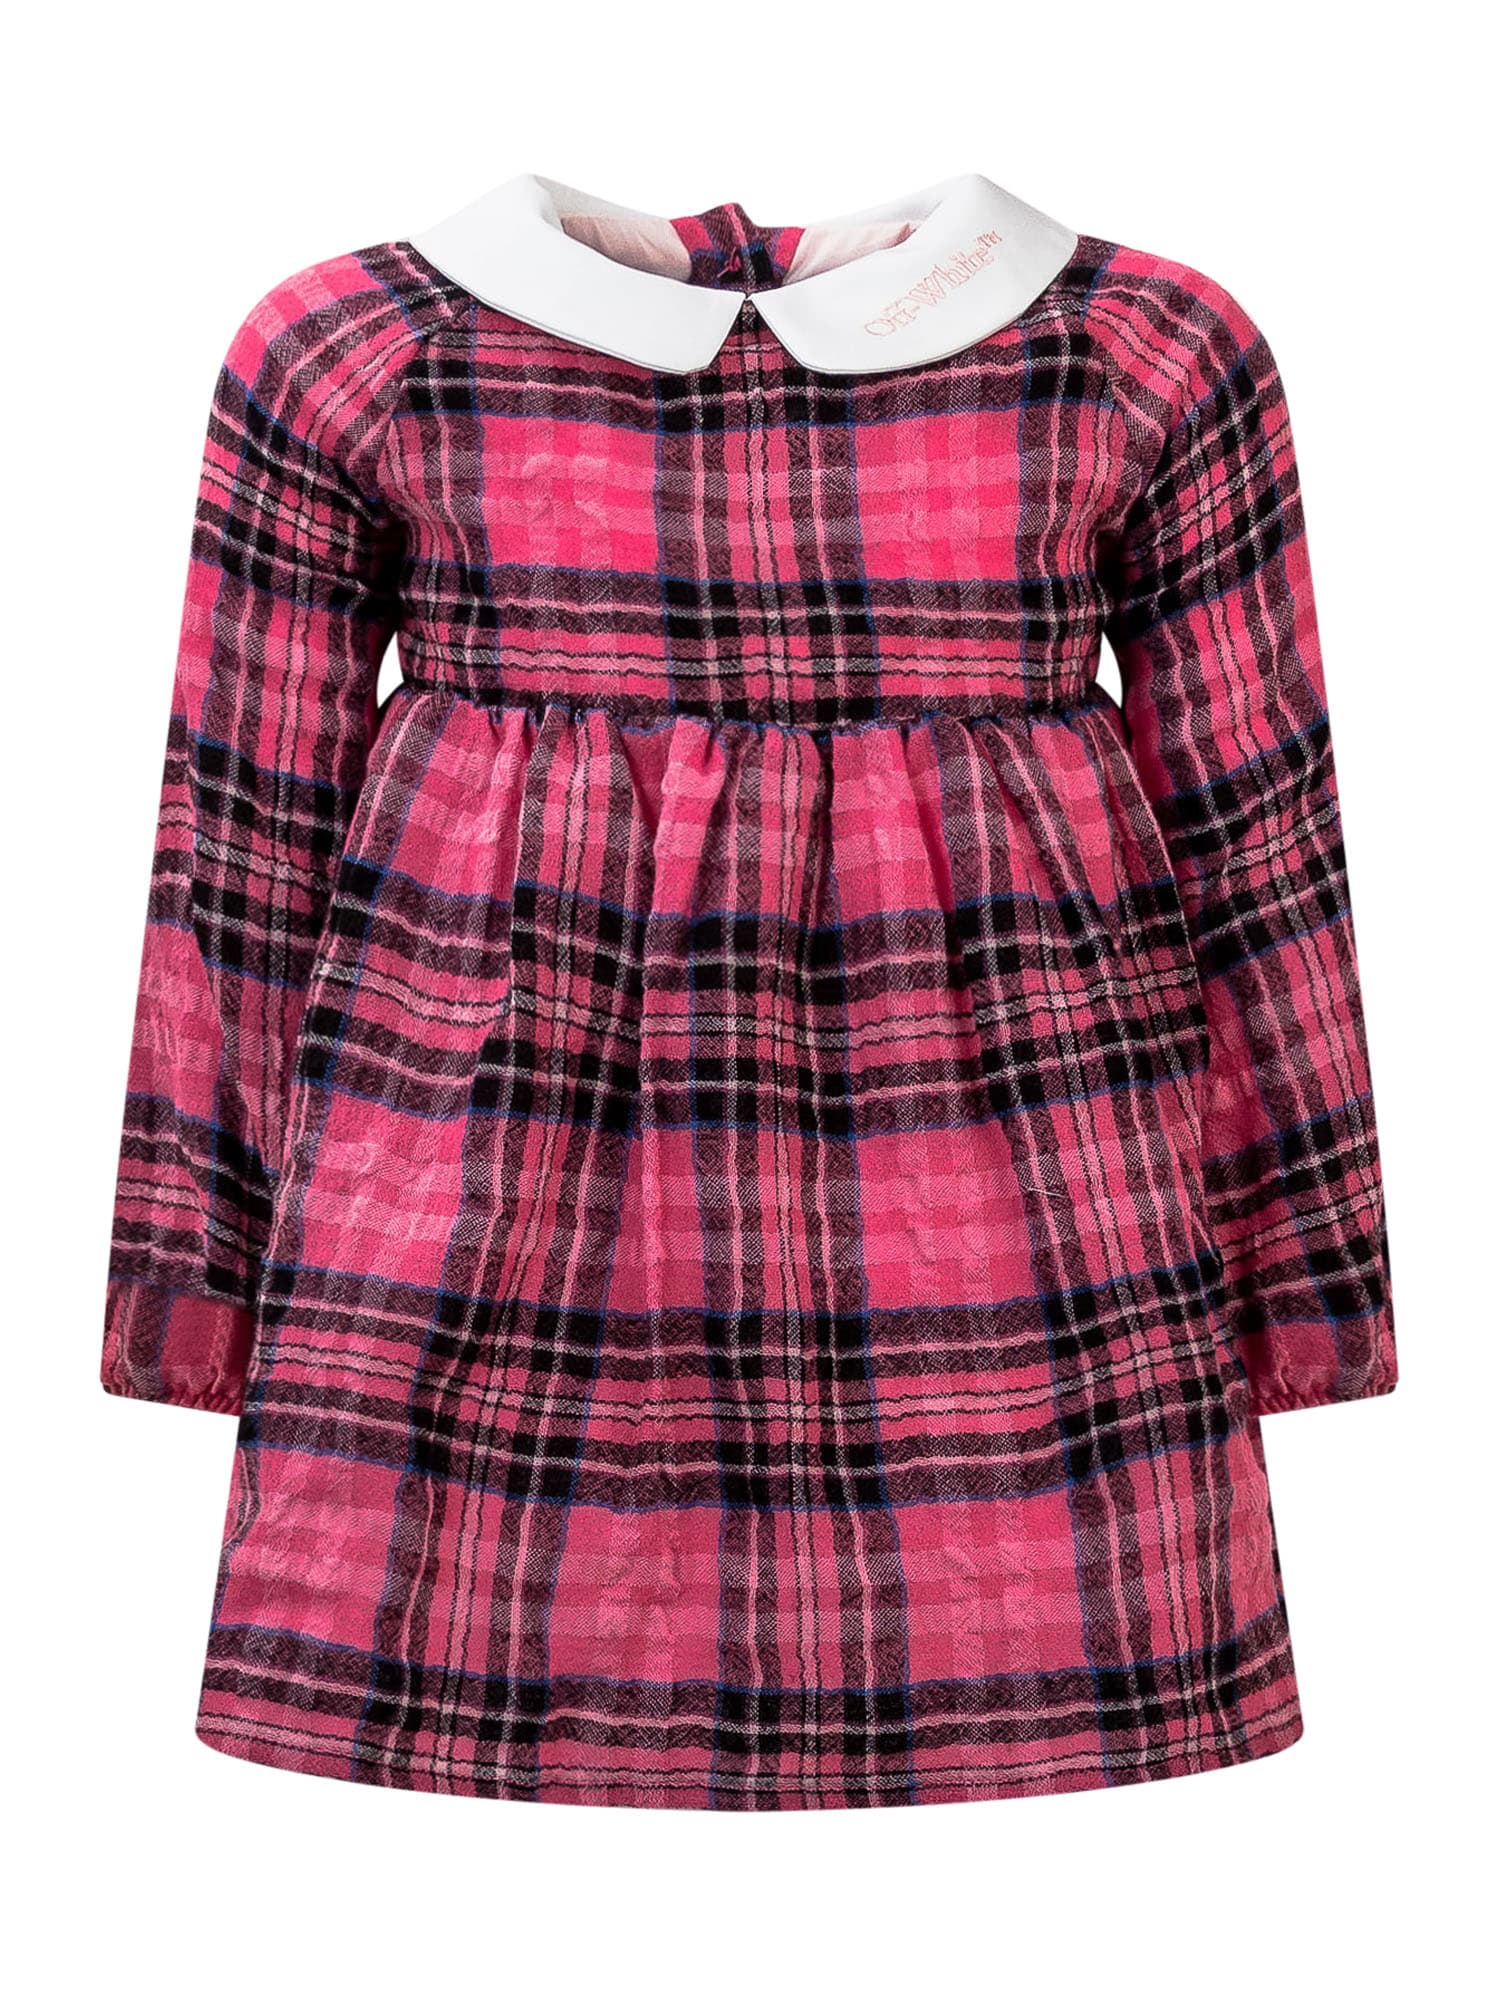 Off-white Babies' Plaid Dress In Fuchsia Pink